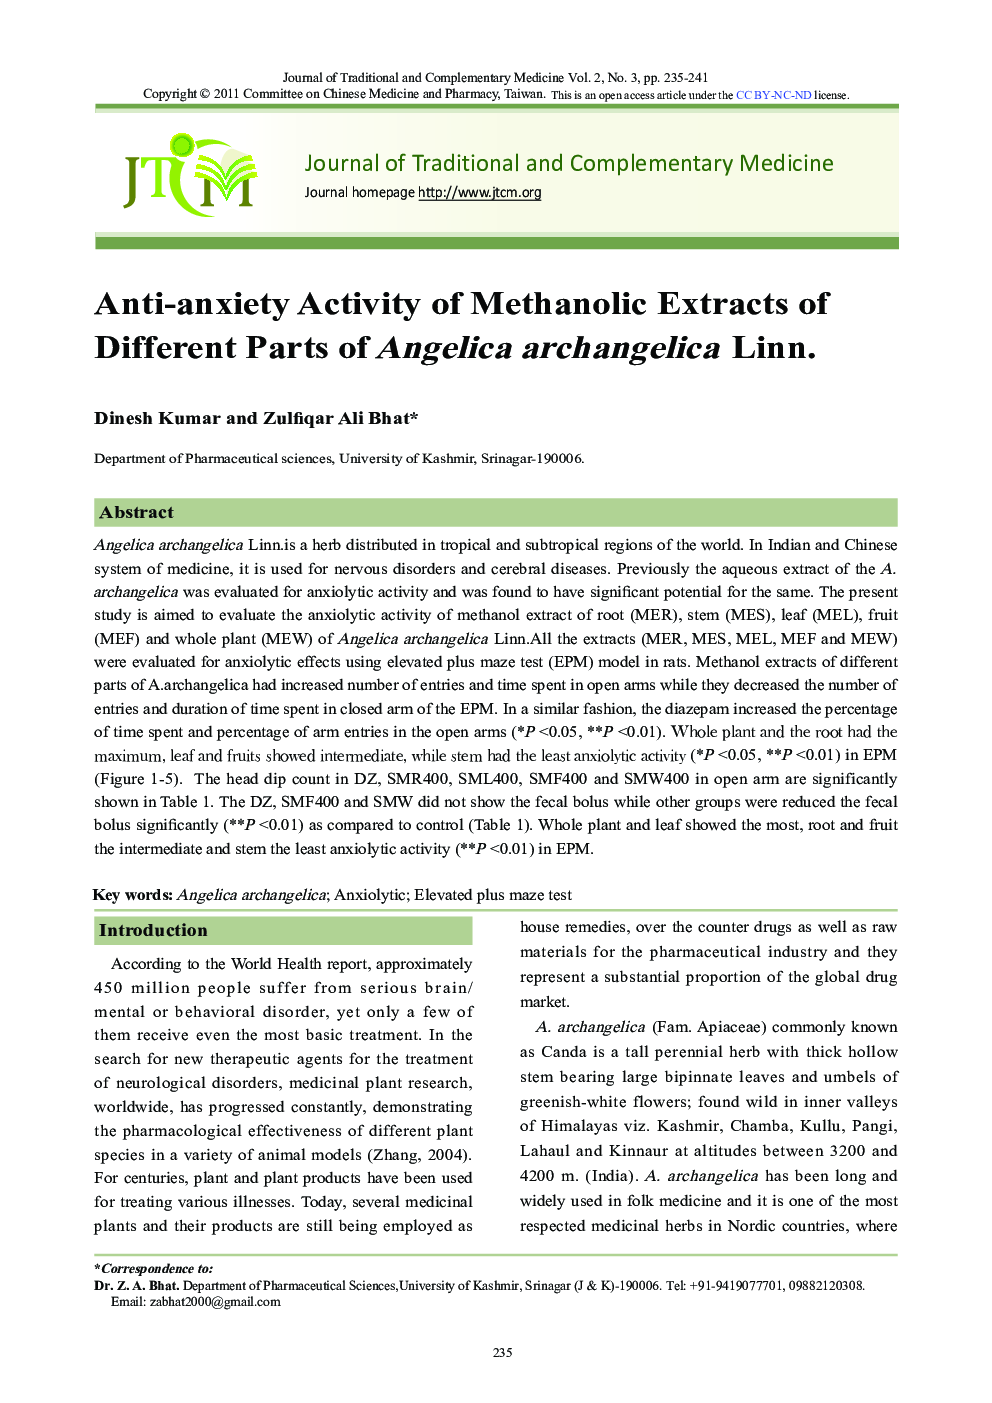 Anti-anxiety Activity of Methanolic Extracts of Different Parts of Angelica archangelica Linn.